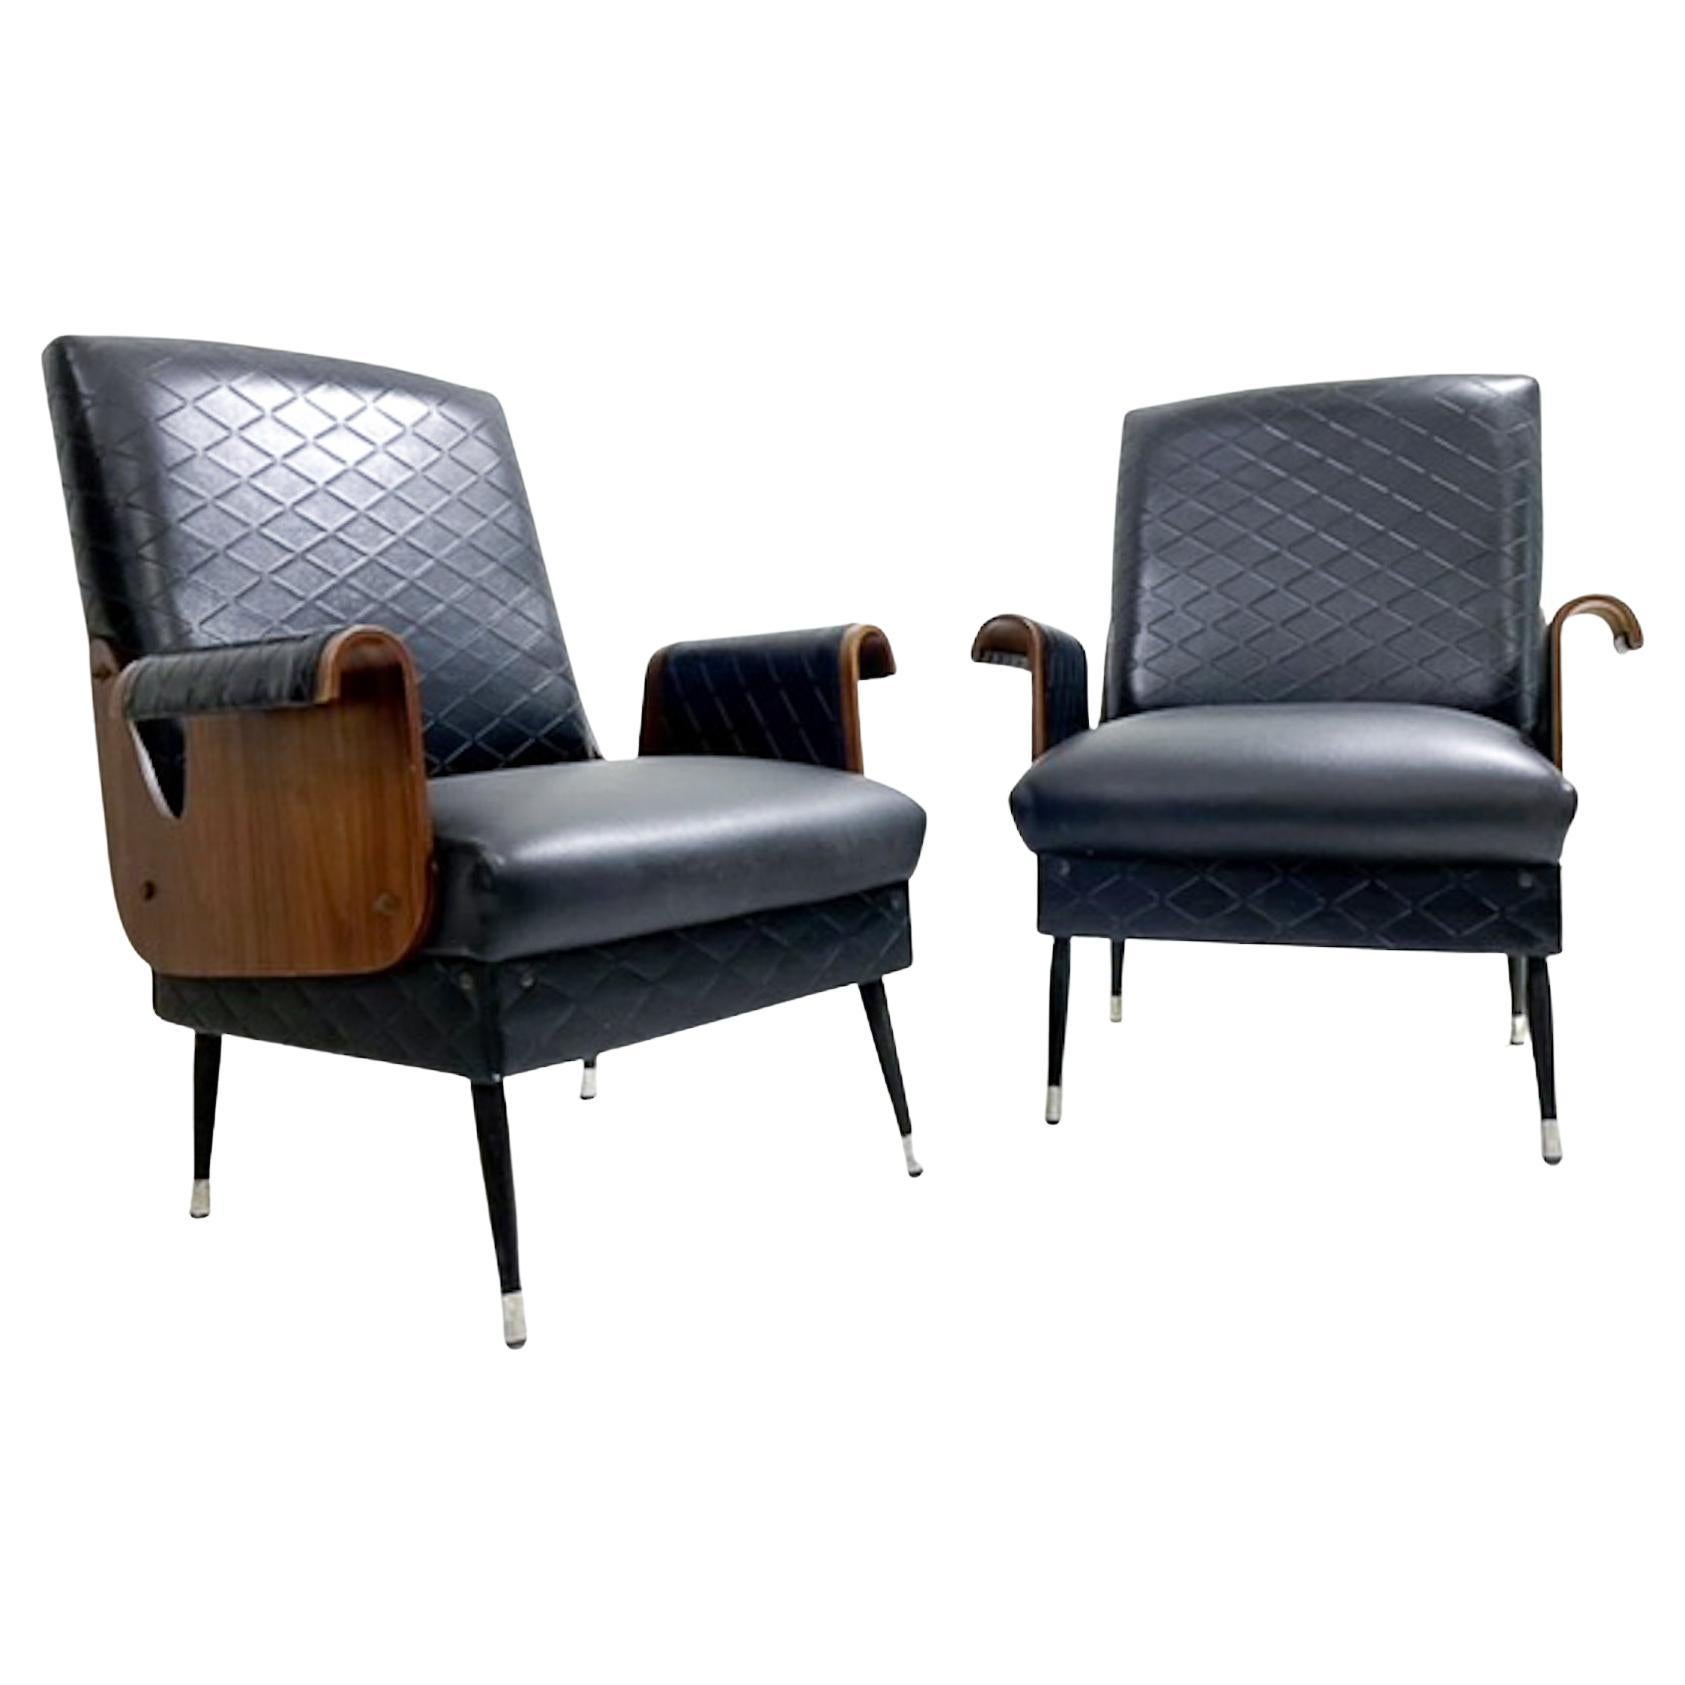 Pair of Mid-Century Modern Armchairs, Walnut and Vegan Leather, Italy, 1960s